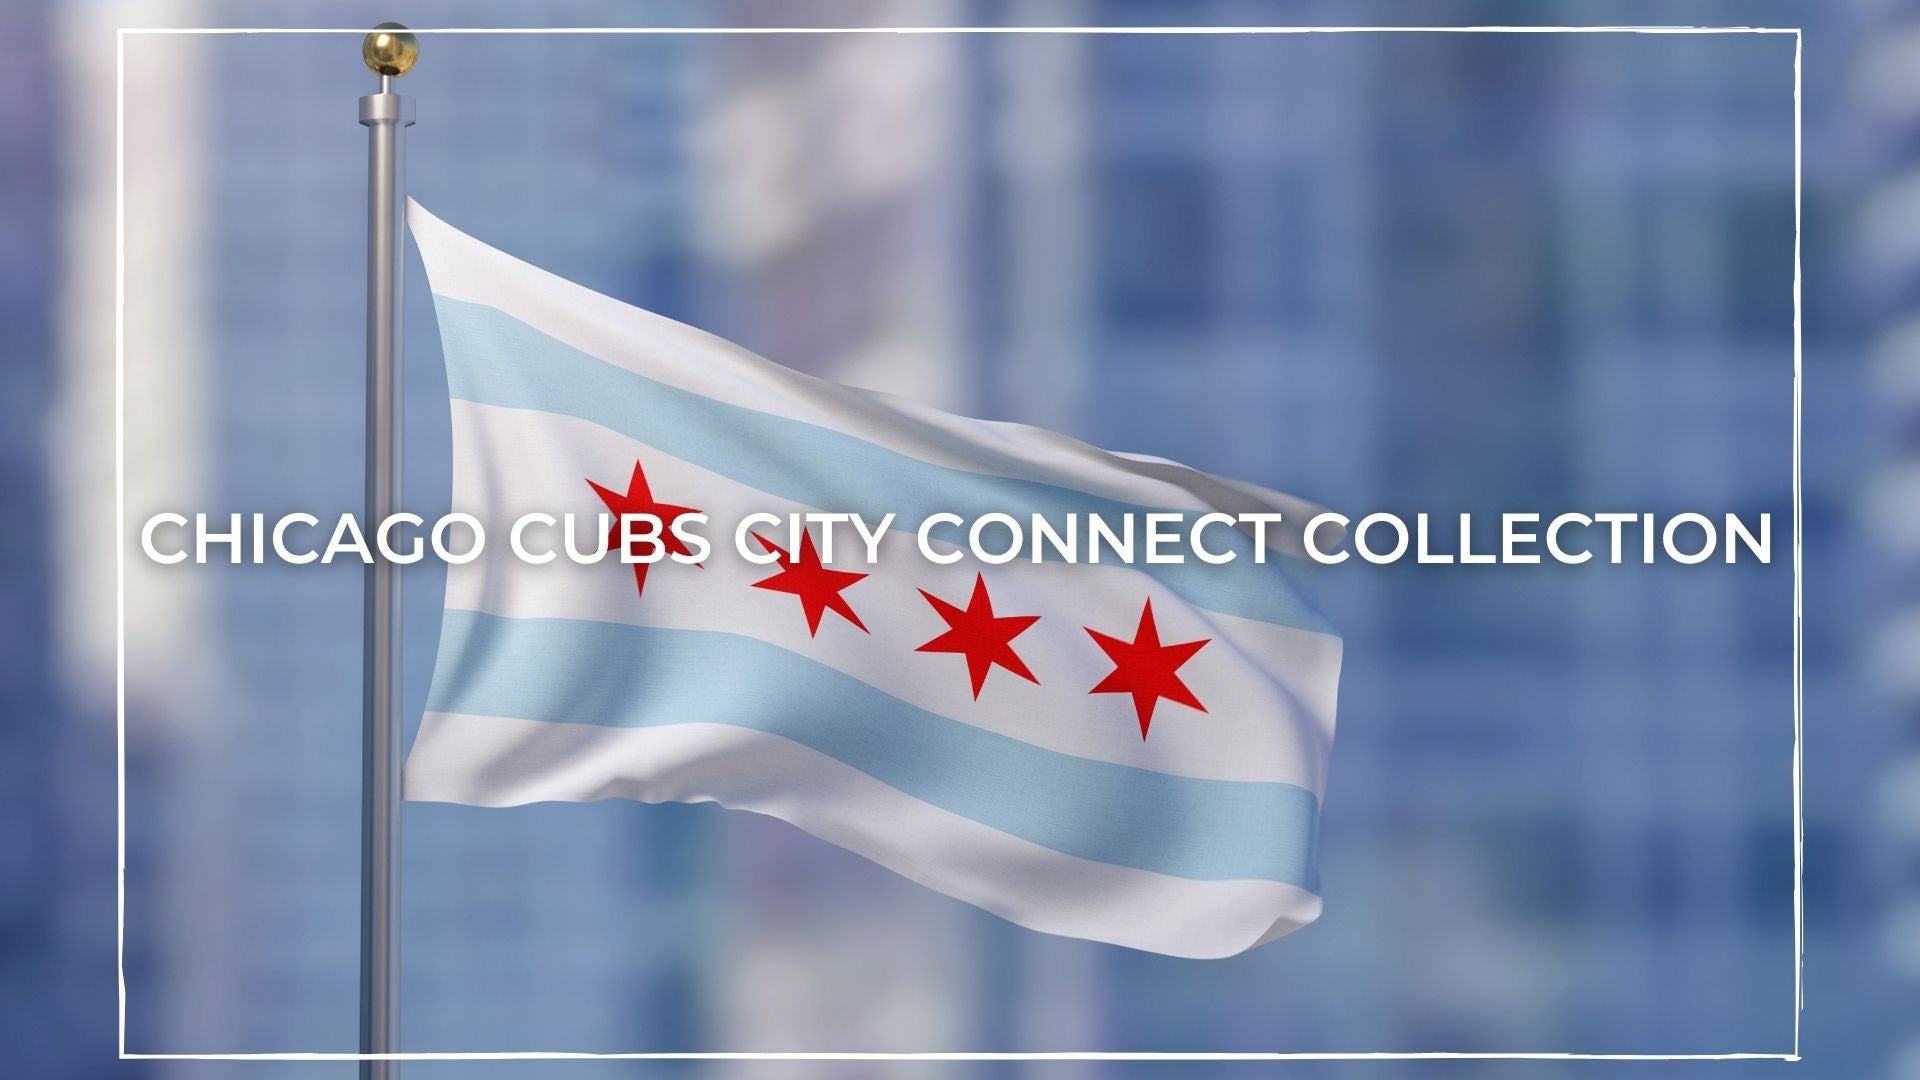 See the Chicago Cubs' new 'Wrigleyville' City Connect uniforms